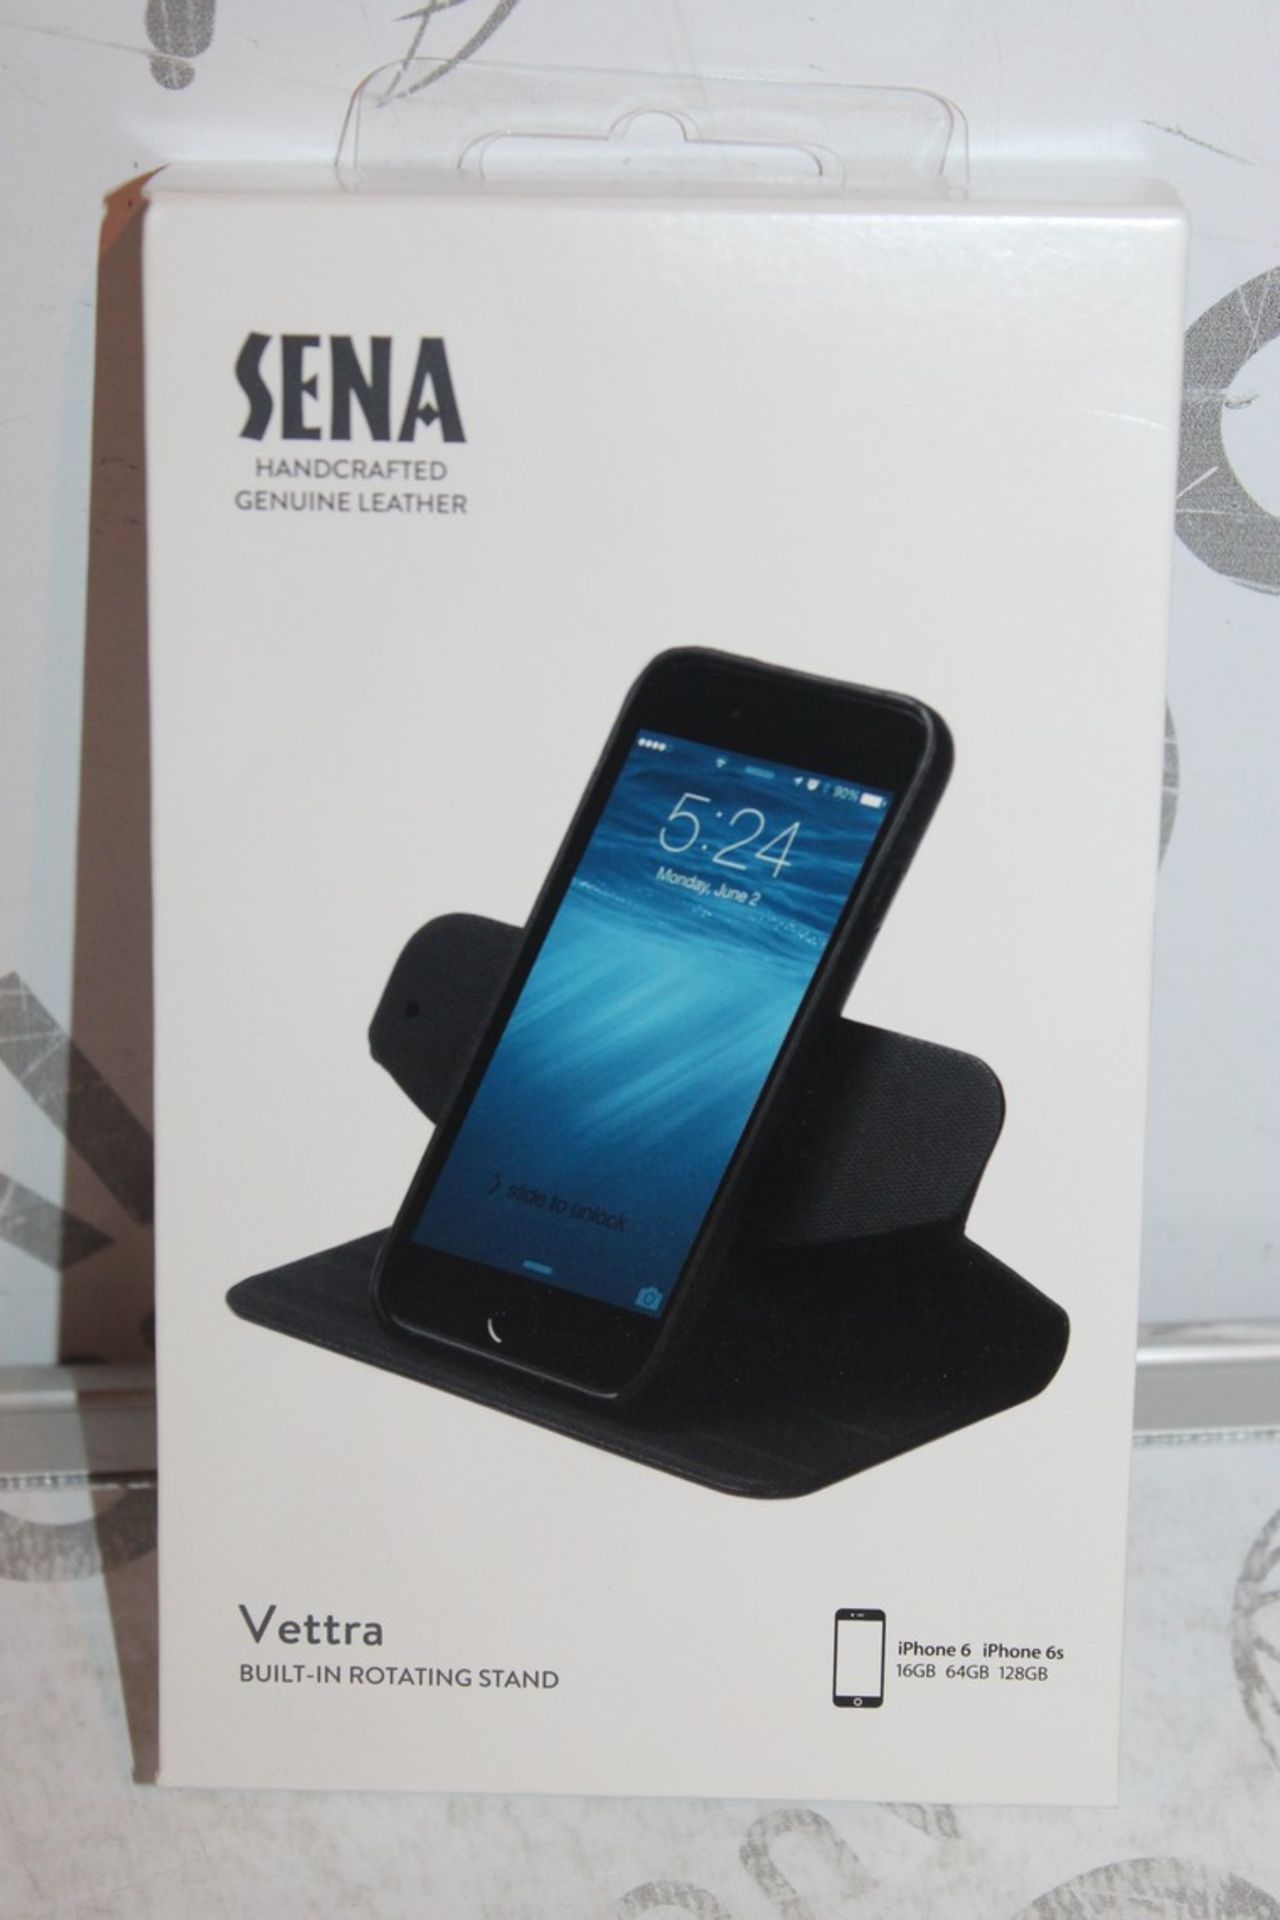 Lot to Contain 2 Brand New Sena Vettra Iphone 6 and 6S Phone Cases with Built In Rotating Stand